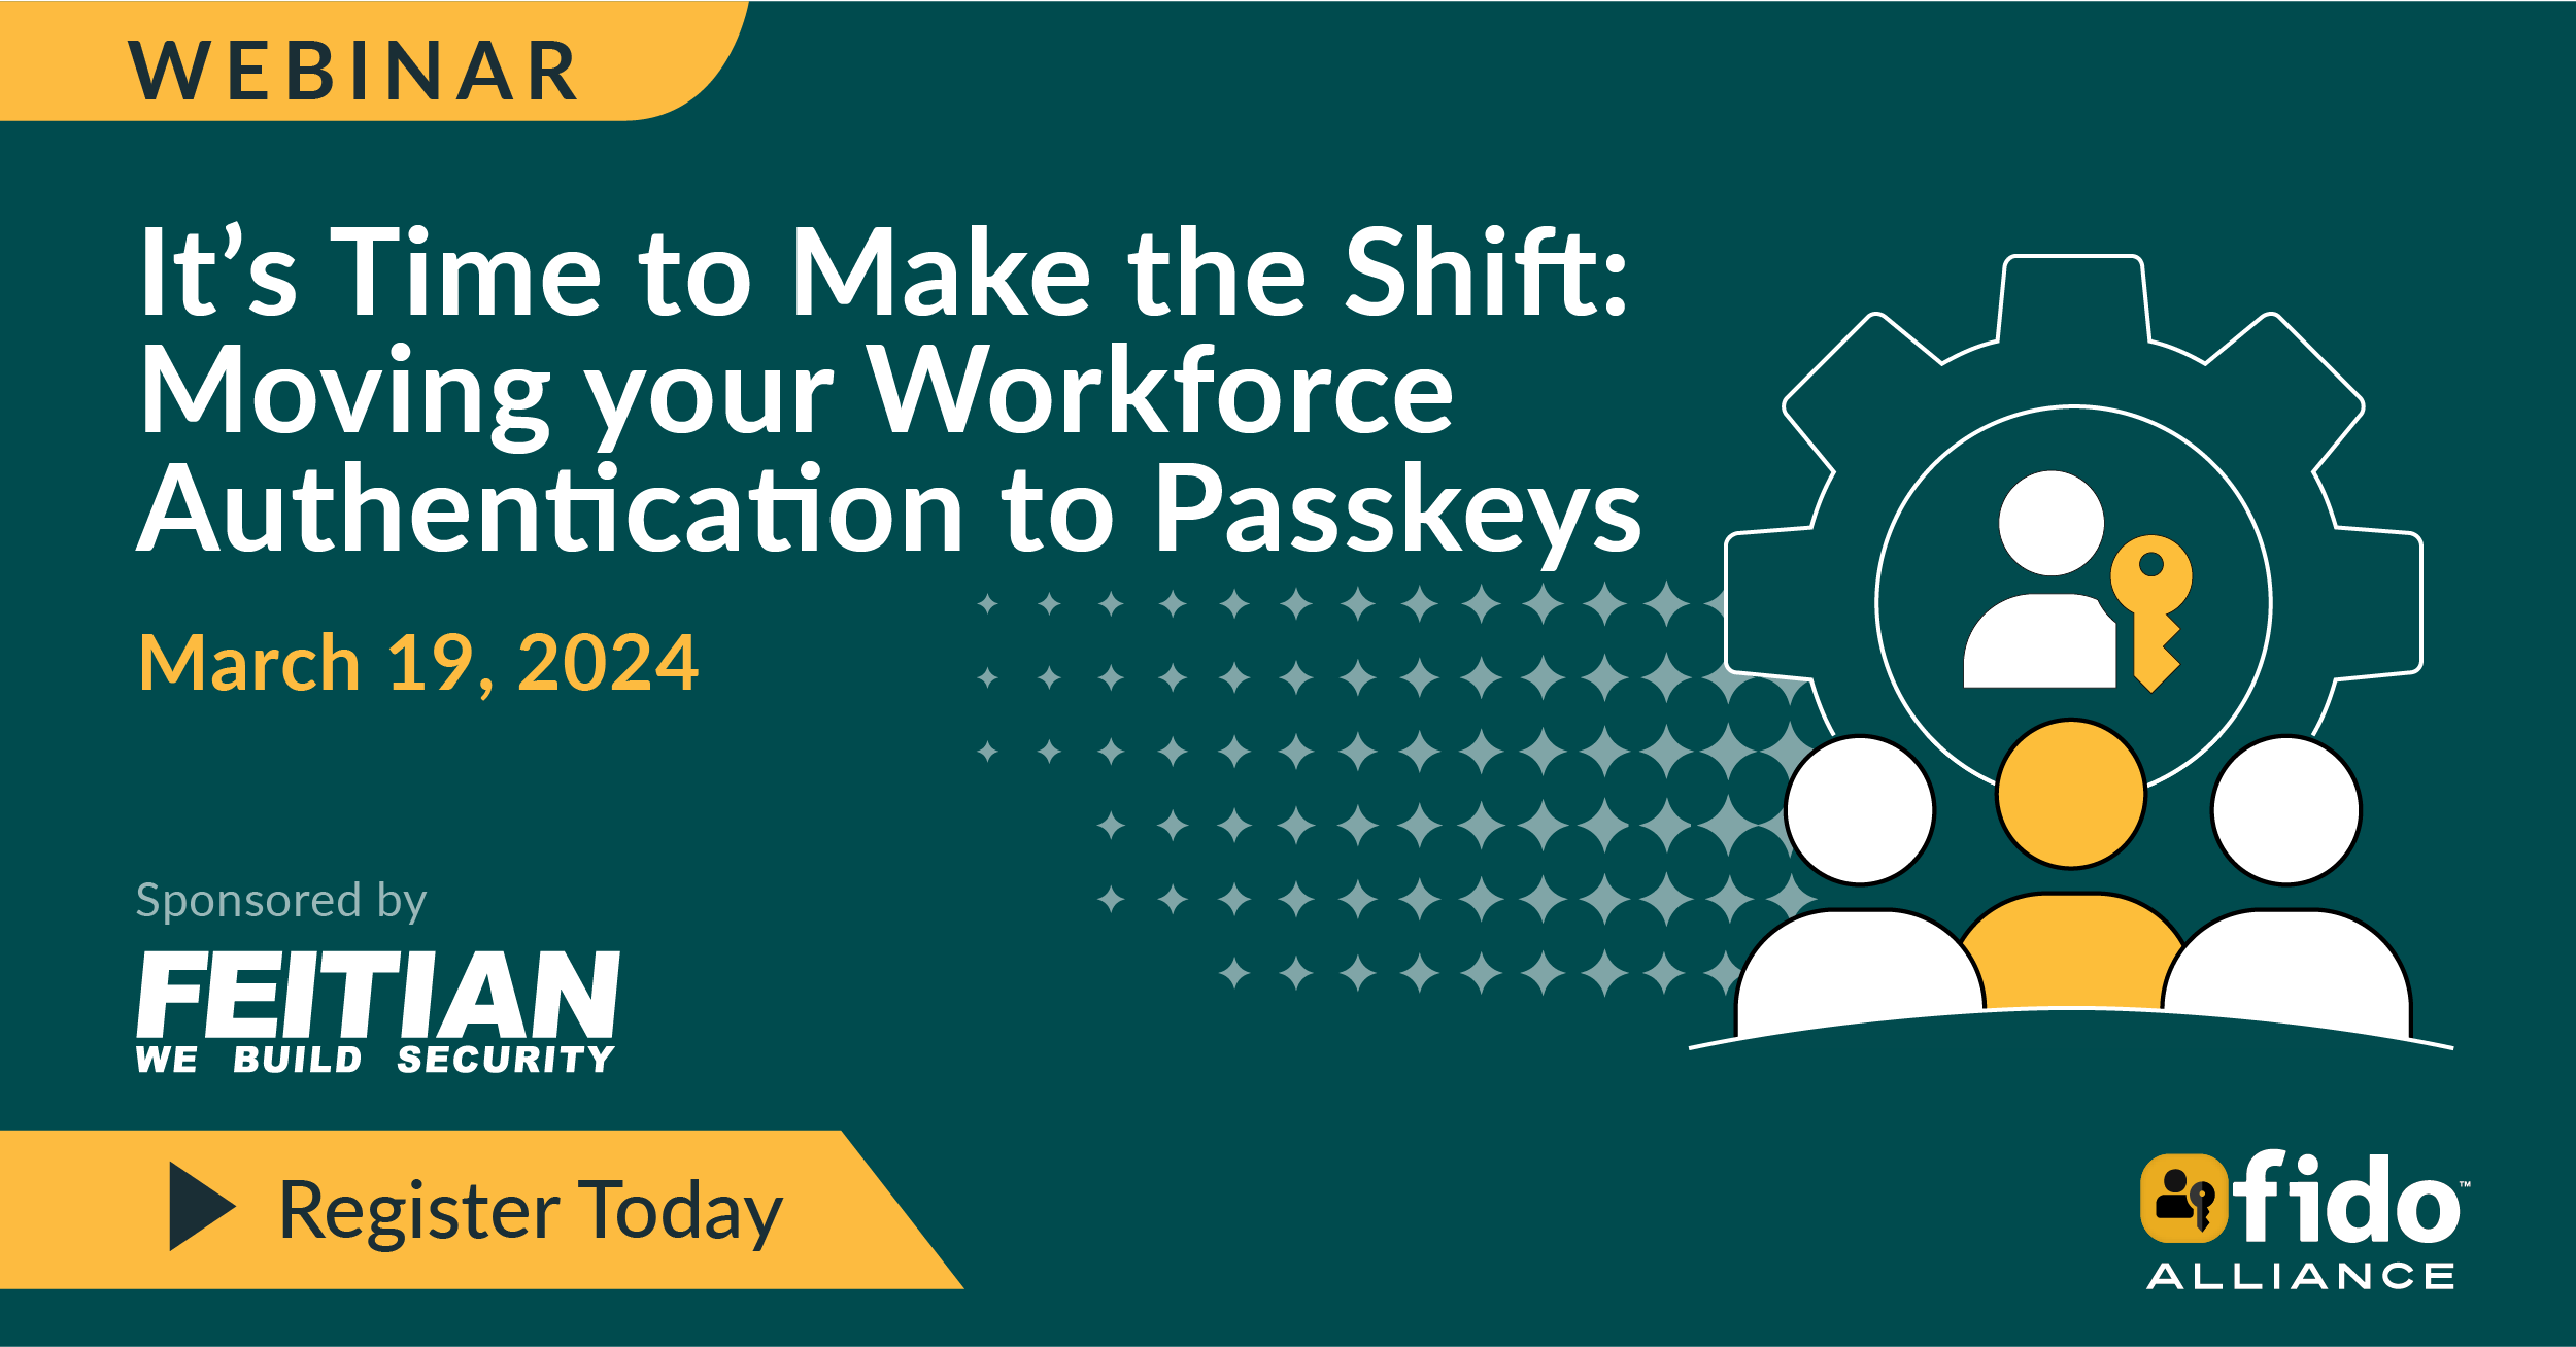 It’s Time to Make the Shift: Moving Your Workforce Authentication to Passkeys